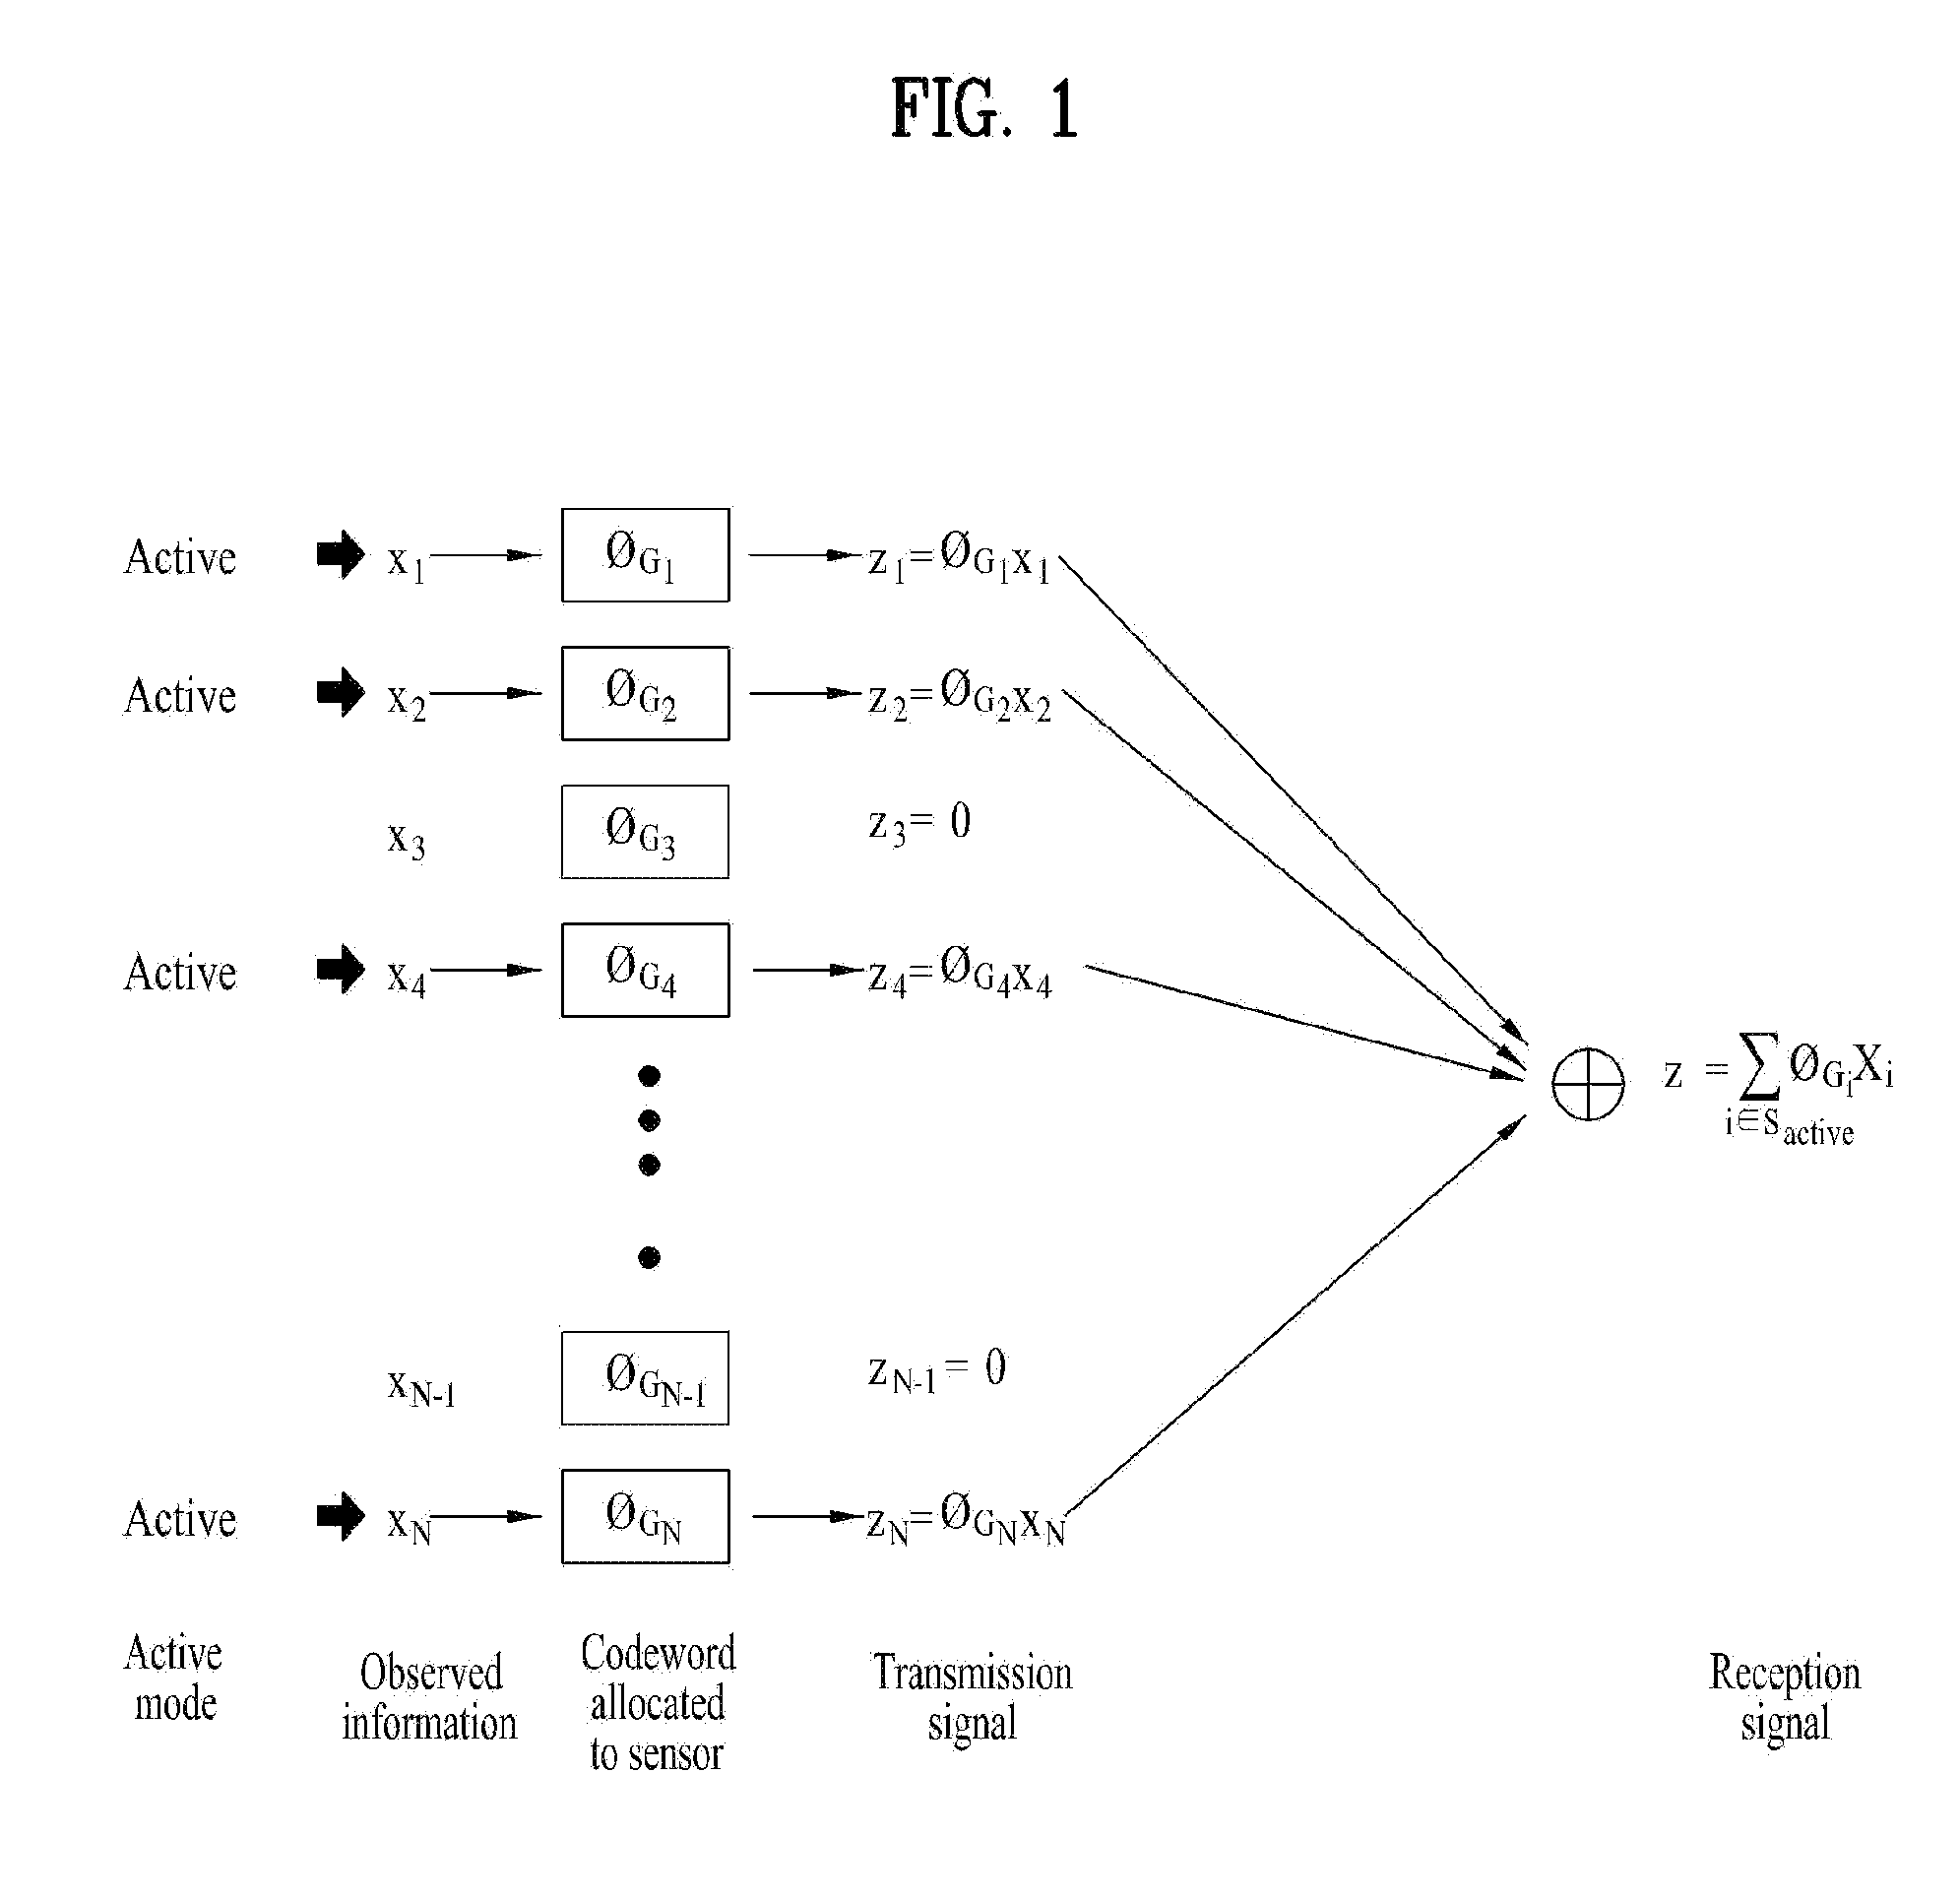 Method and apparatus for transmitting and receiving signals based on dual compressive sensing in wireless communication system